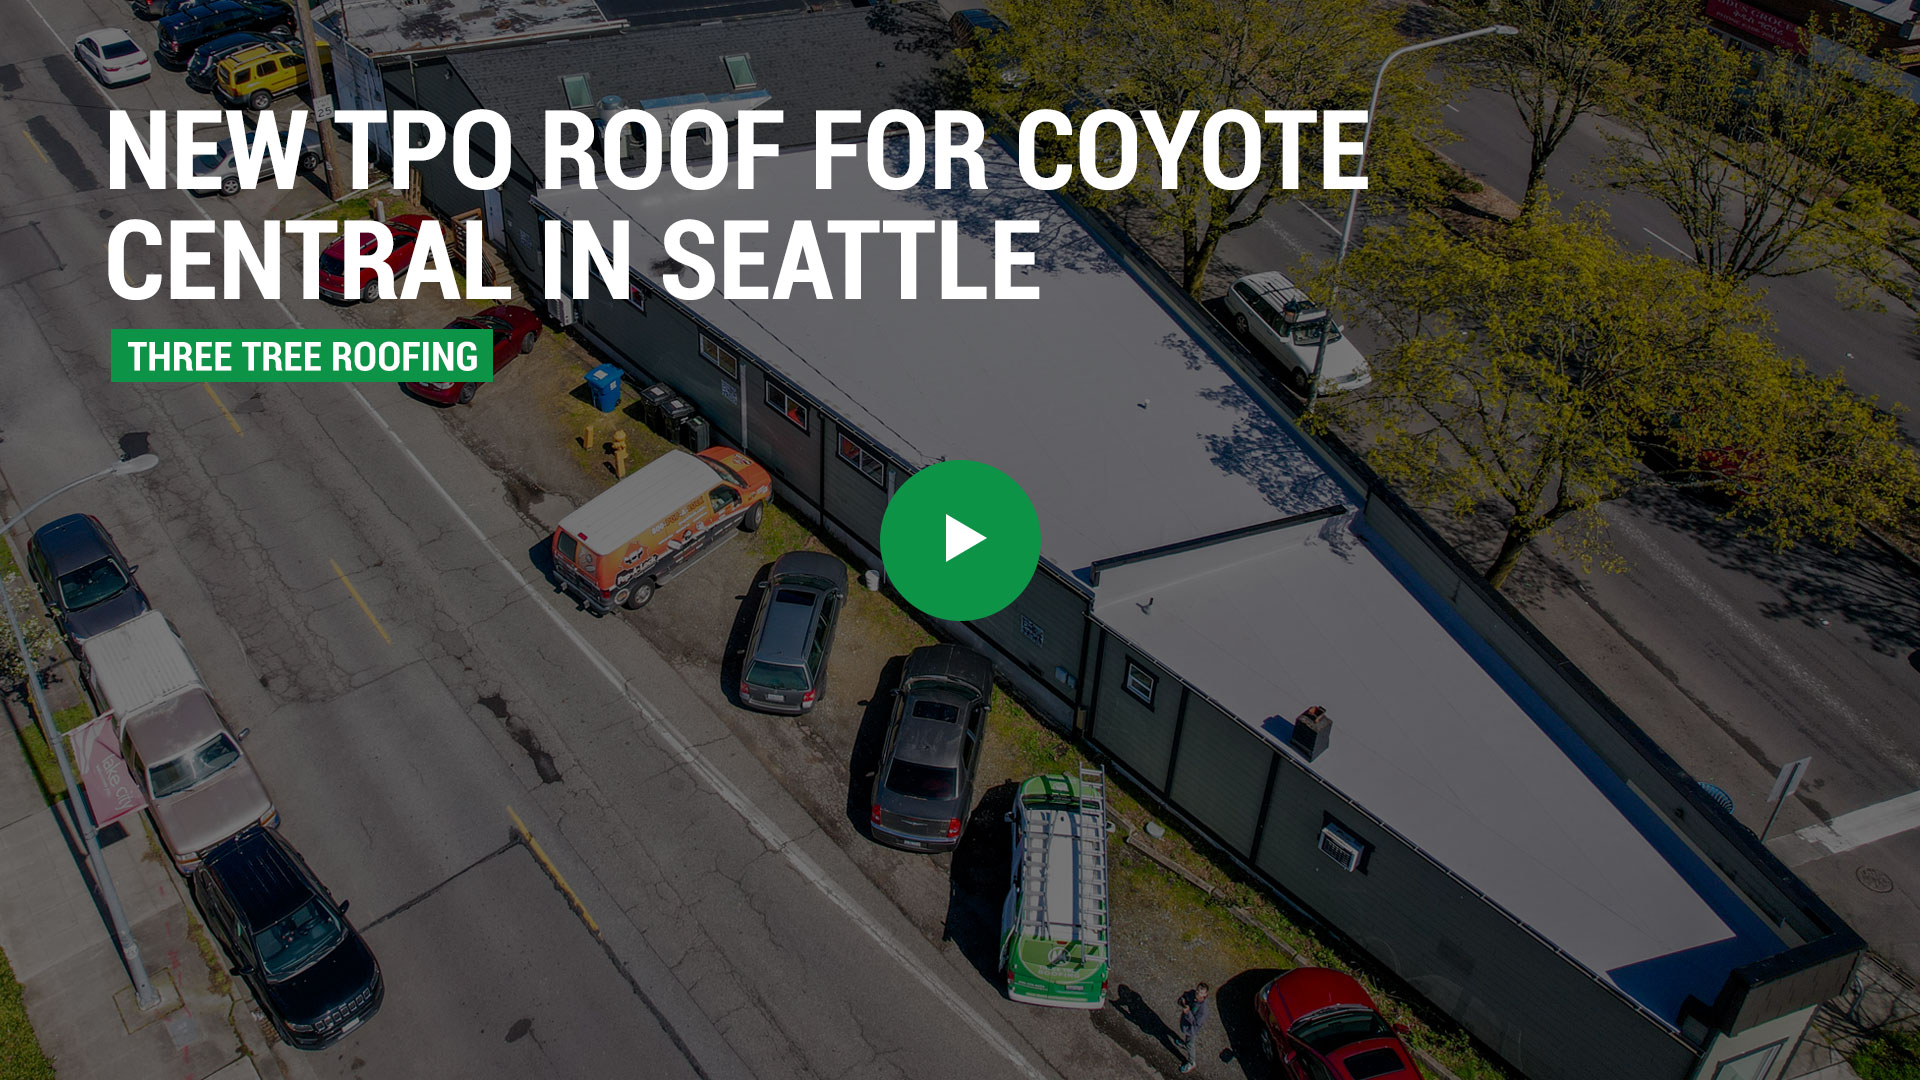 Roofing Project: New Flat TPO Roof For Coyote Central In Seattle - Roofing Video